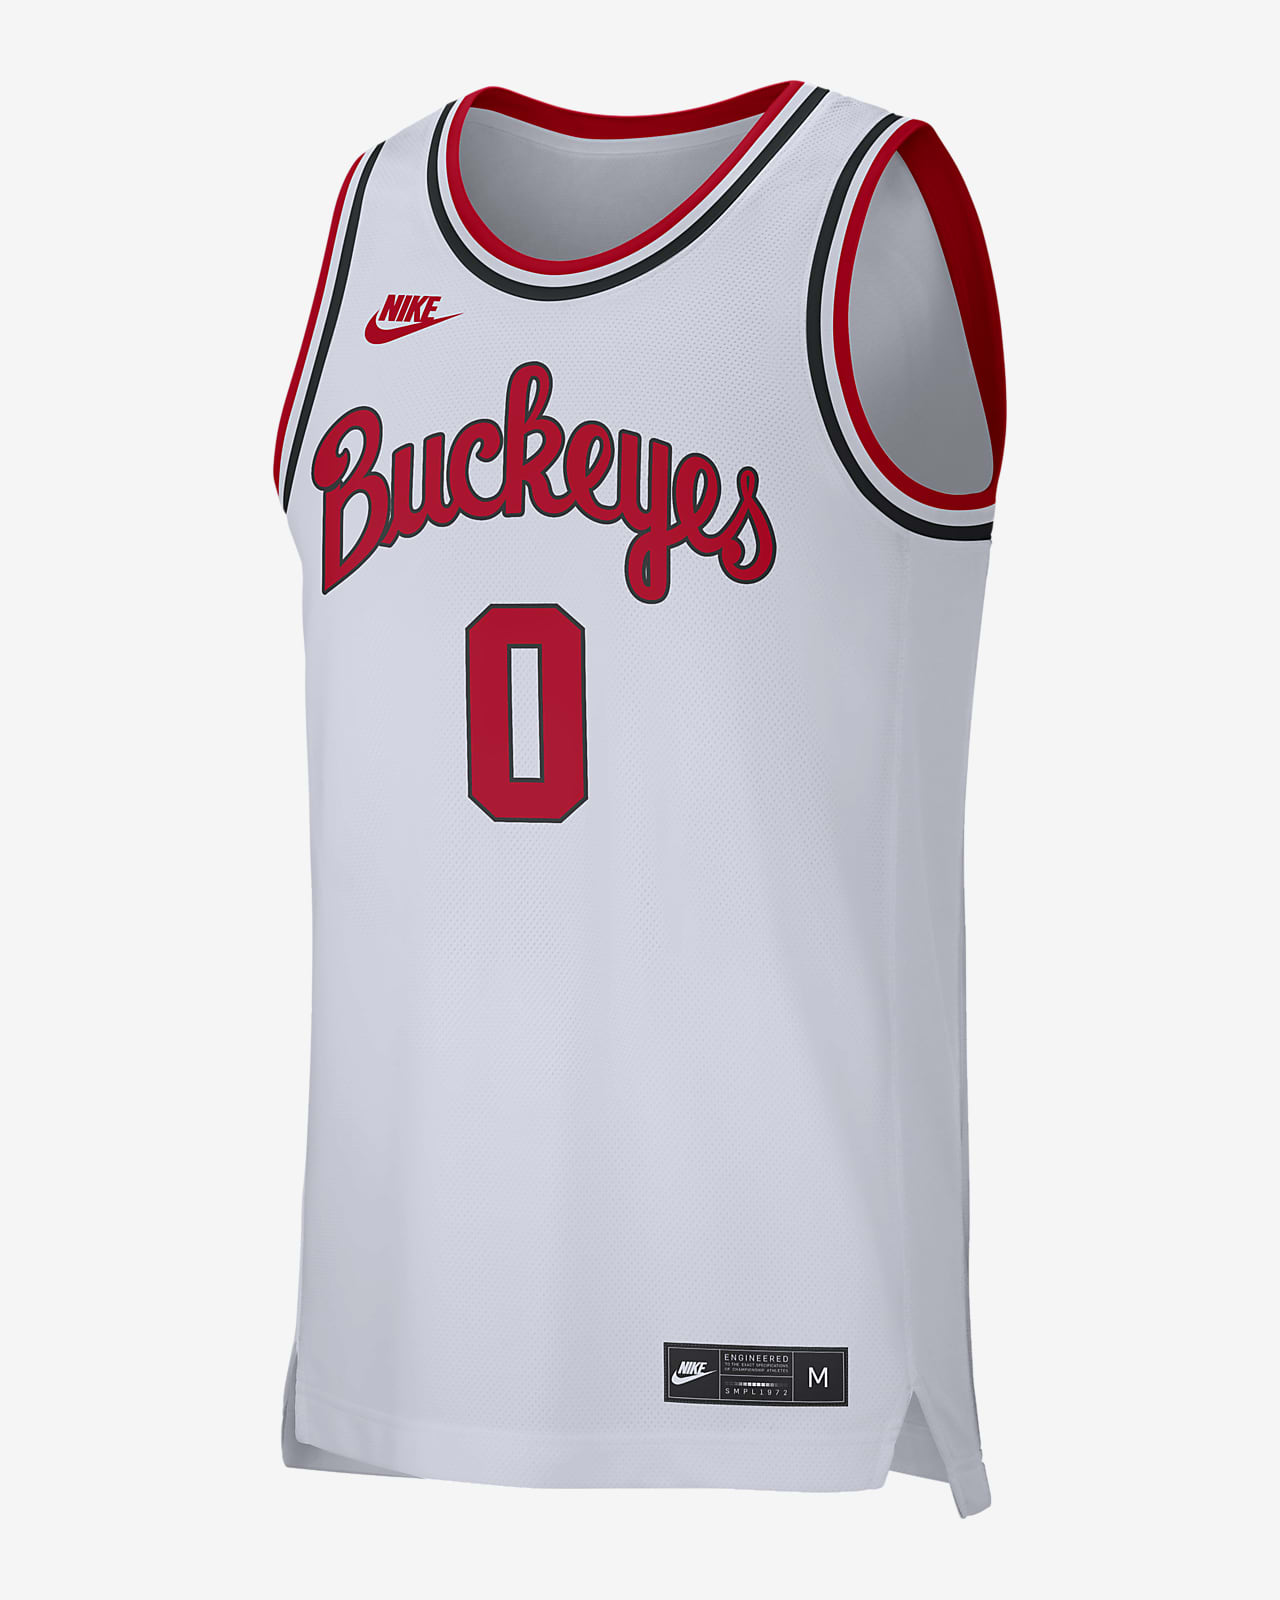 ohio state throwback basketball jersey